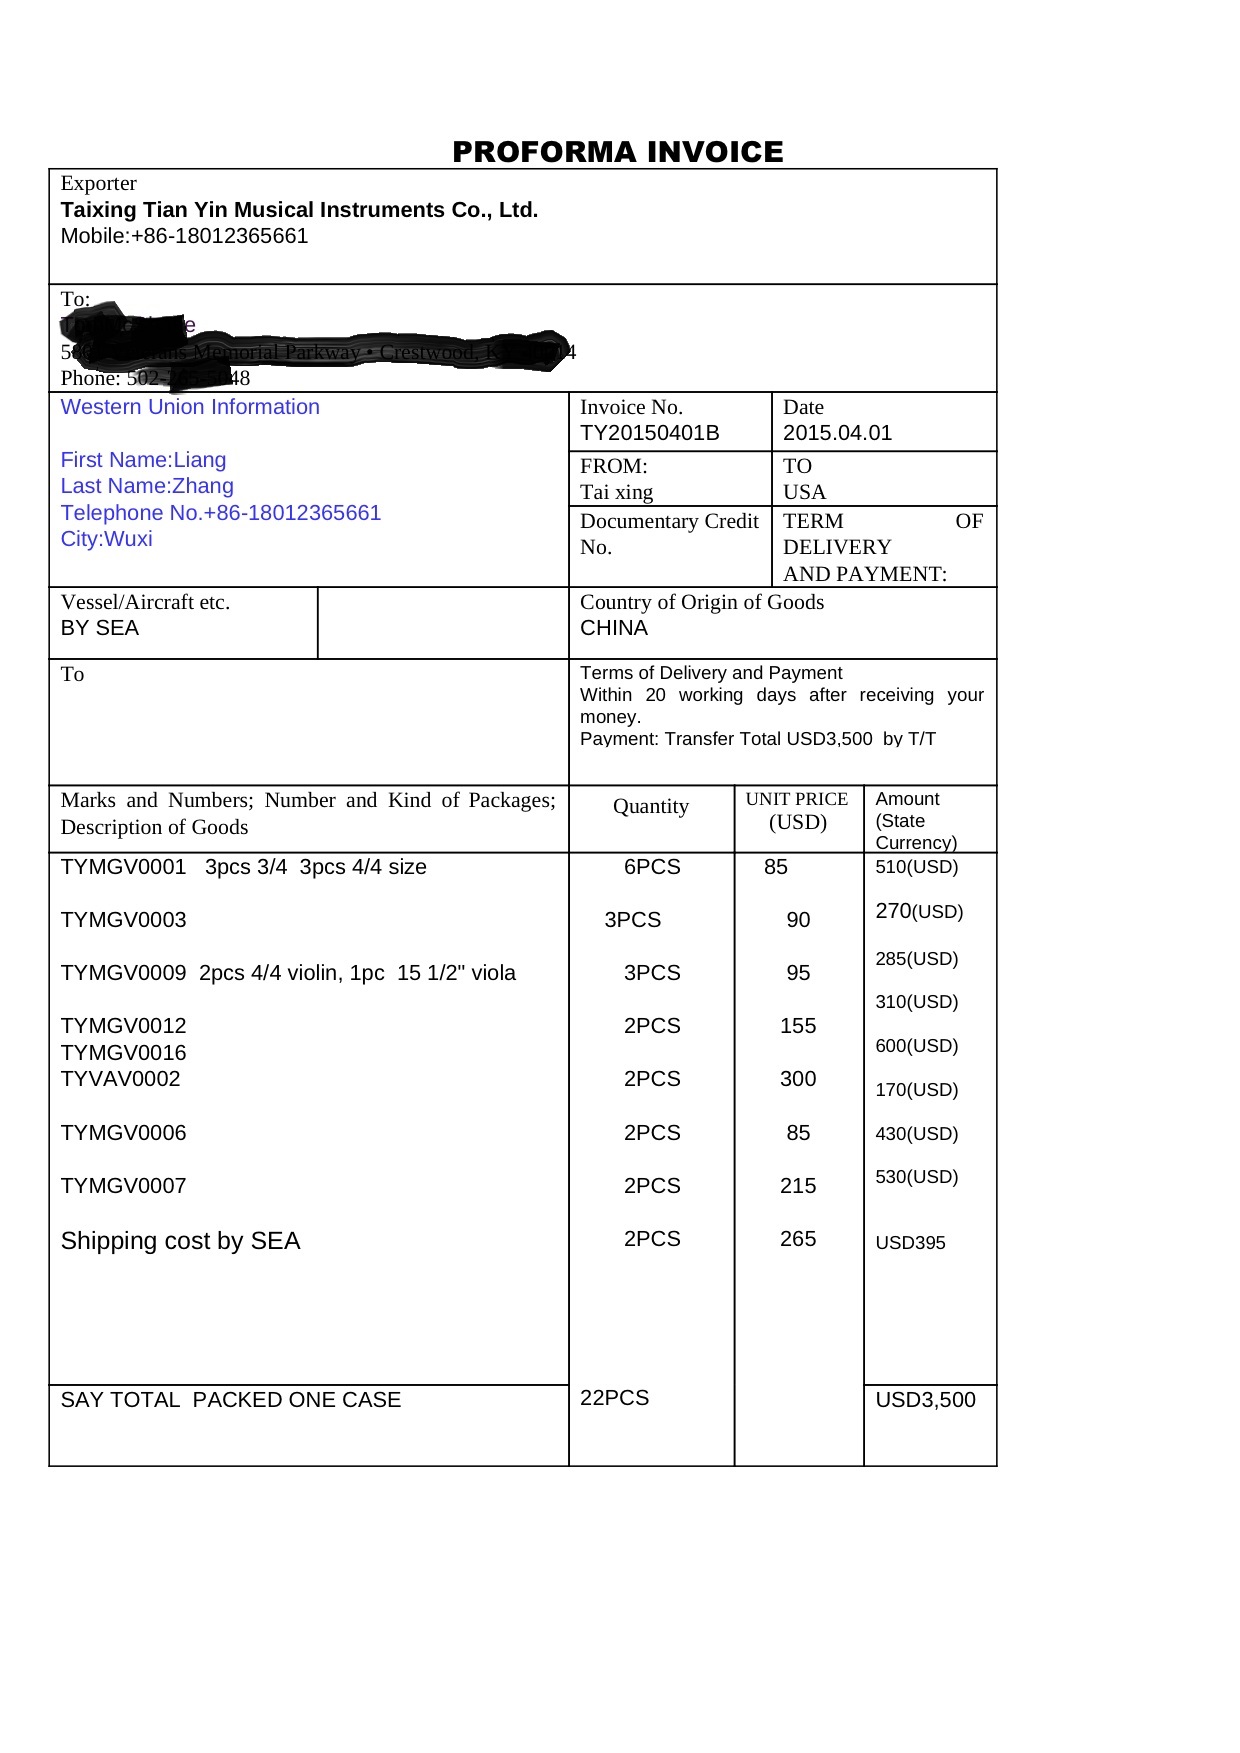 The invoice shows the Seller's information. These goods were never delivered. 